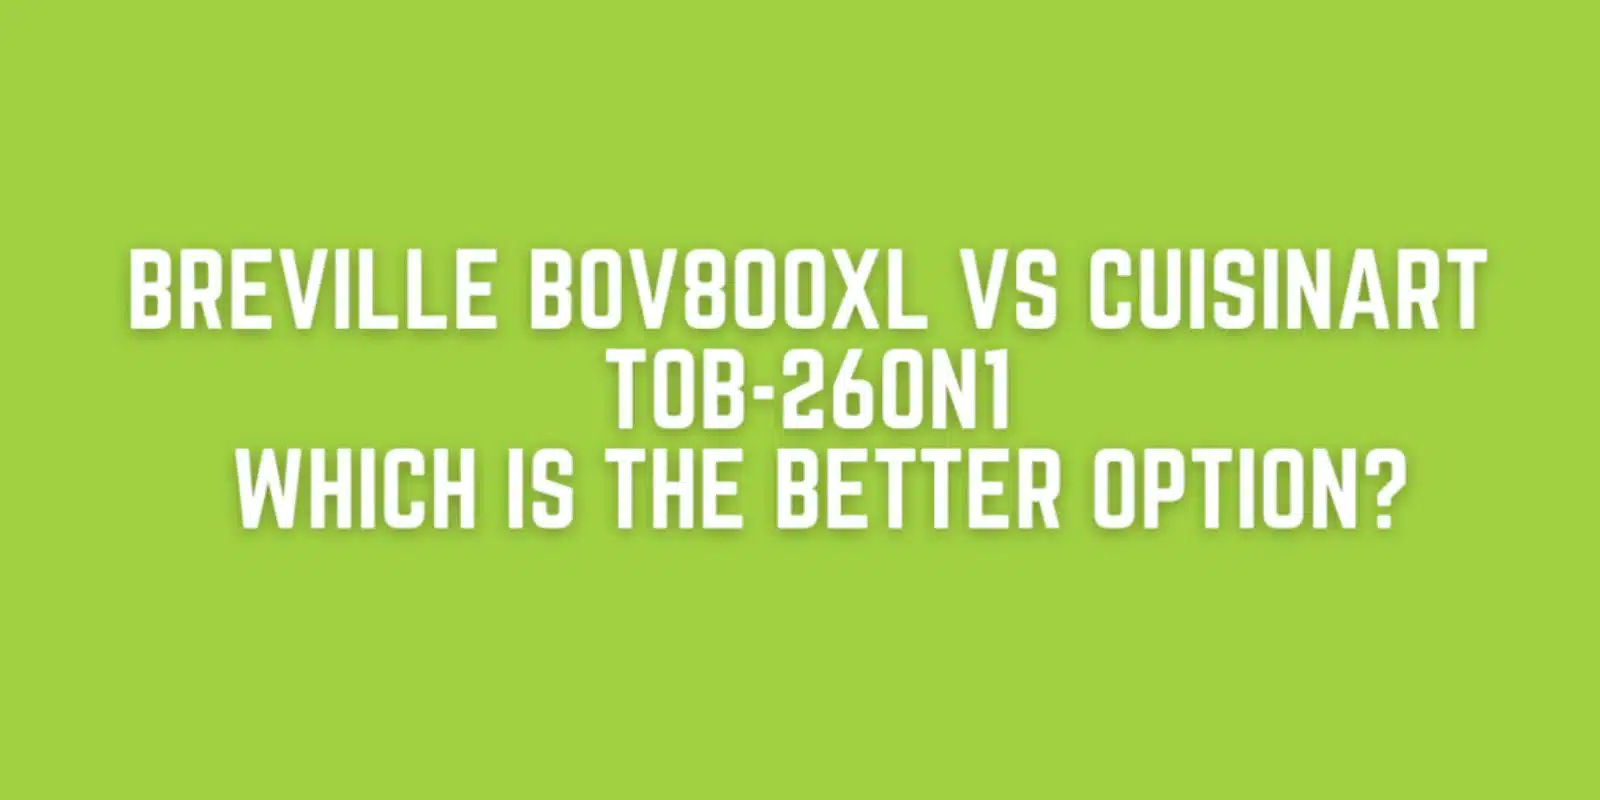 Breville BOV800XL vs Cuisinart TOB-260N1: Which Is the Better Option?